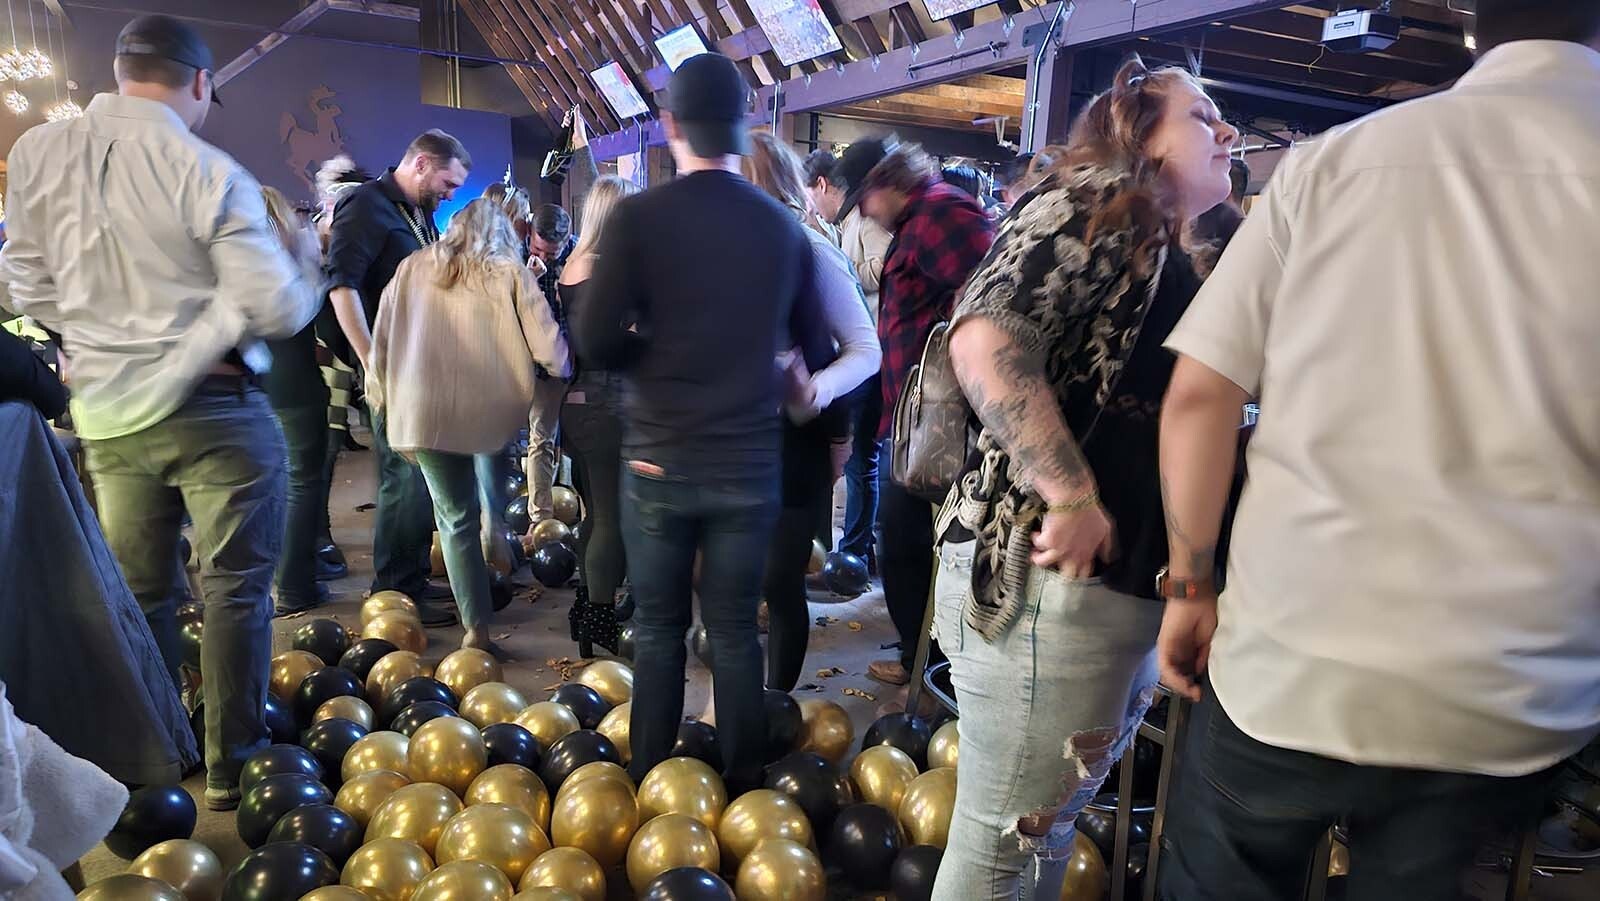 Shortly after midnight on New Year's Eve, people stomp on balloons that have just been dropped at Westby Edge Brewing Company.